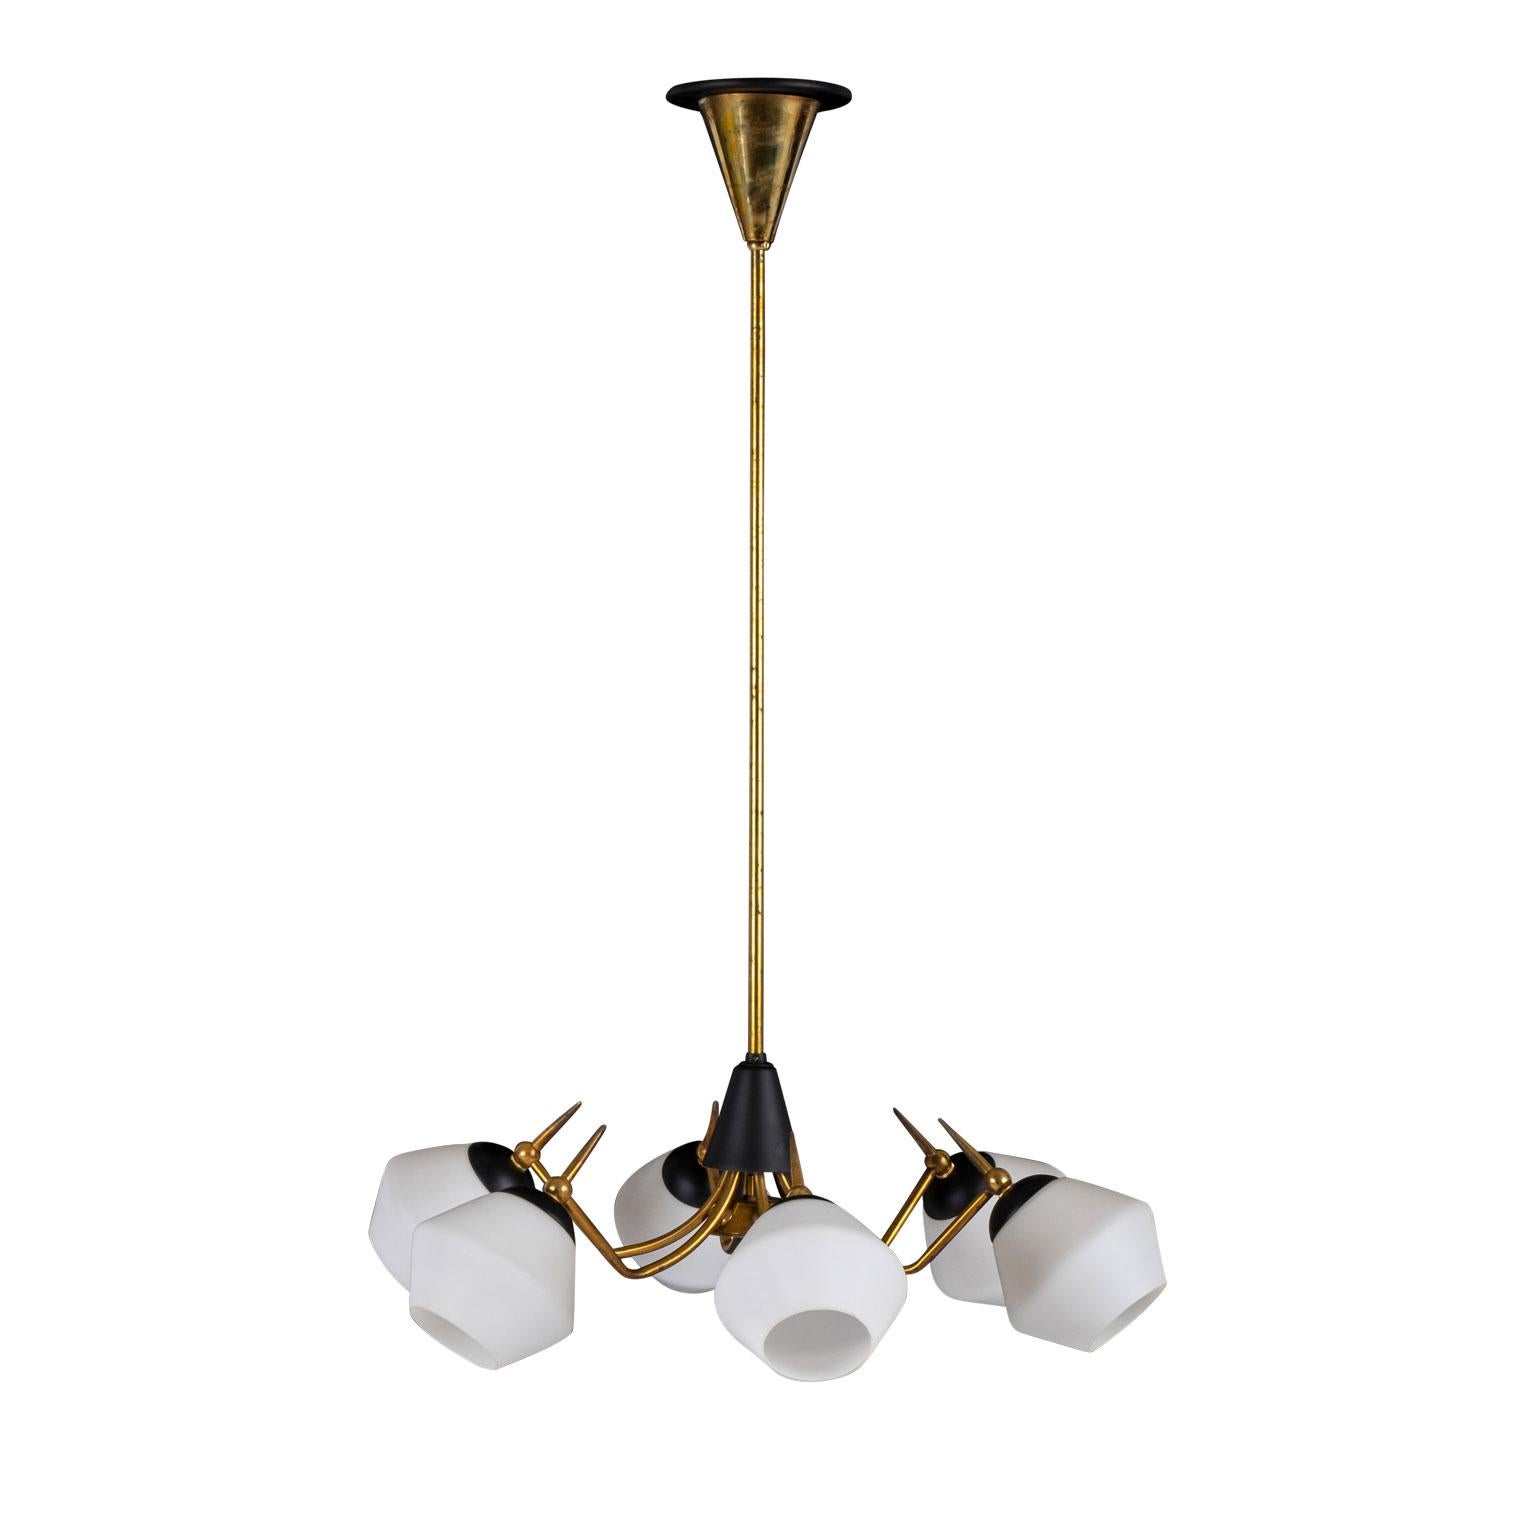 Stilnovo style mid-century chandelier from Italy. Gilt-brass and black painted metal frame six-arm chandelier with white glass shades. Newly wired, using all UL approved parts, for use within the USA accommodates candelabrum-size bulbs. New